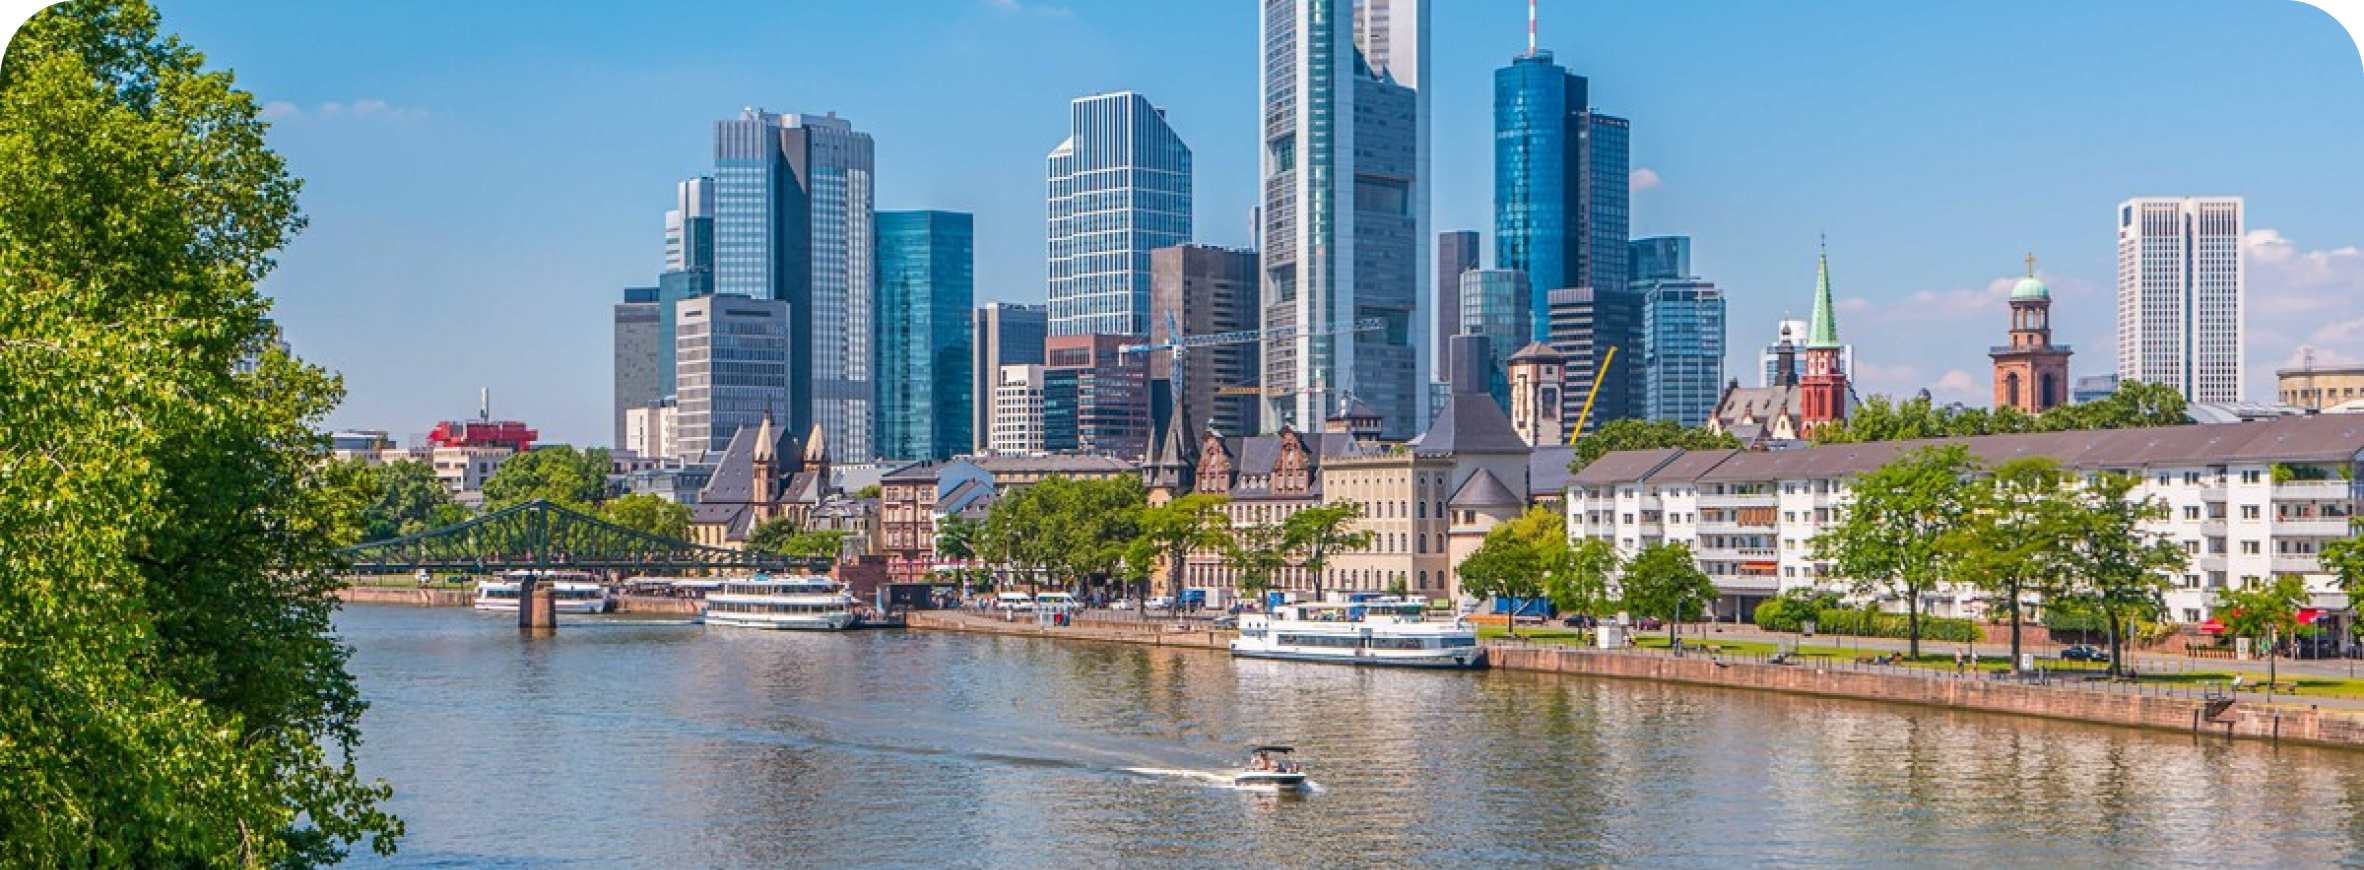 Suwag cover image of a vibrant city with blue sky, water and skyscrapers alongside a green and sunny landscape.